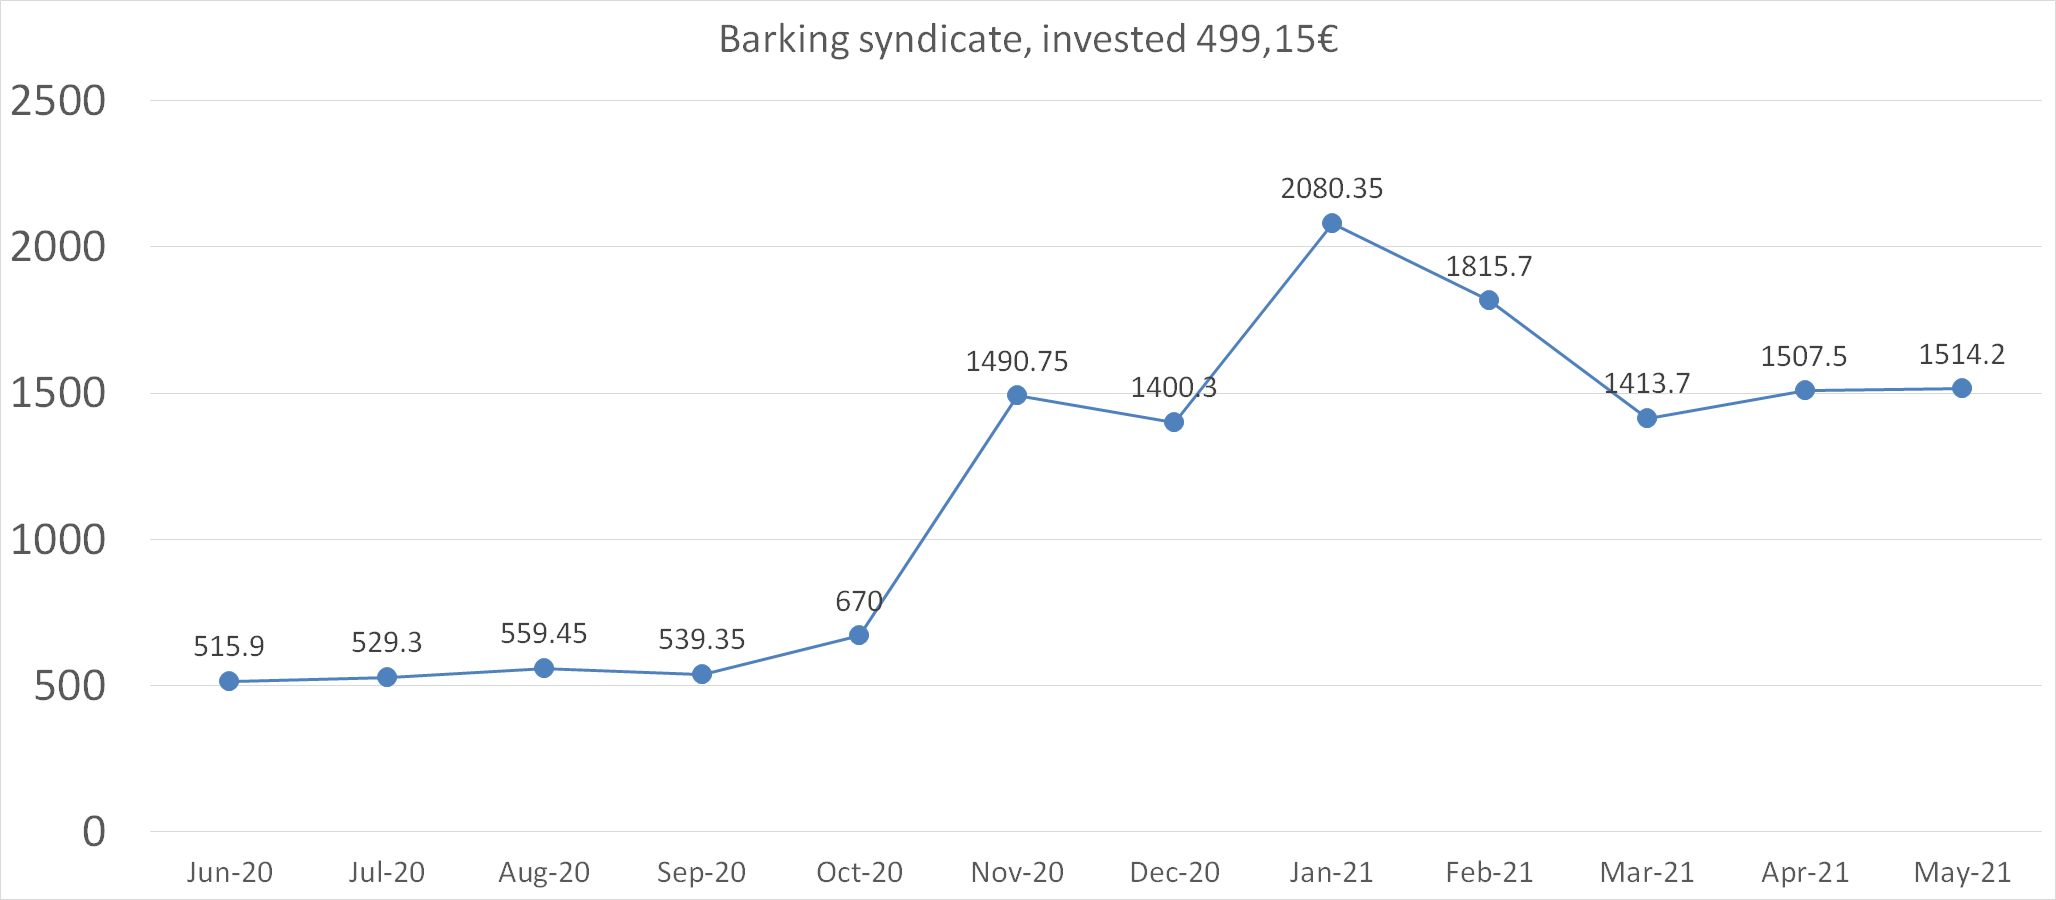 barking syndicate worth in may 2021